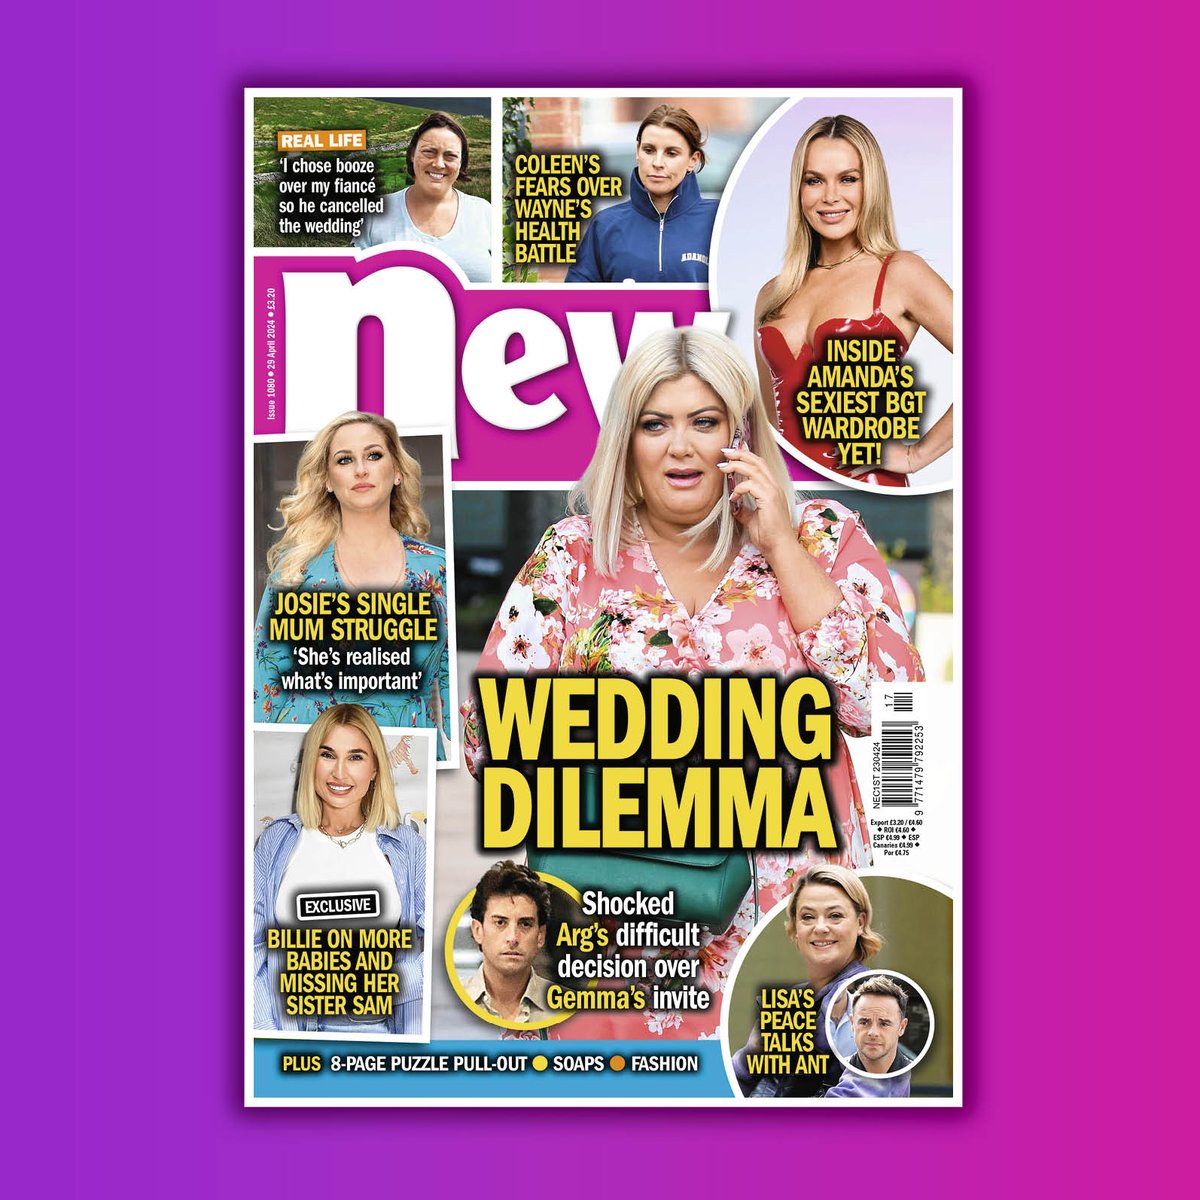 💫NEW ISSUE ALERT!💫 In this week’s magazine we’ve got Gemma Collins’ wedding dilemma plus an exclusive with Billie Shepherd on more babies missing her sister Sam. Out now.